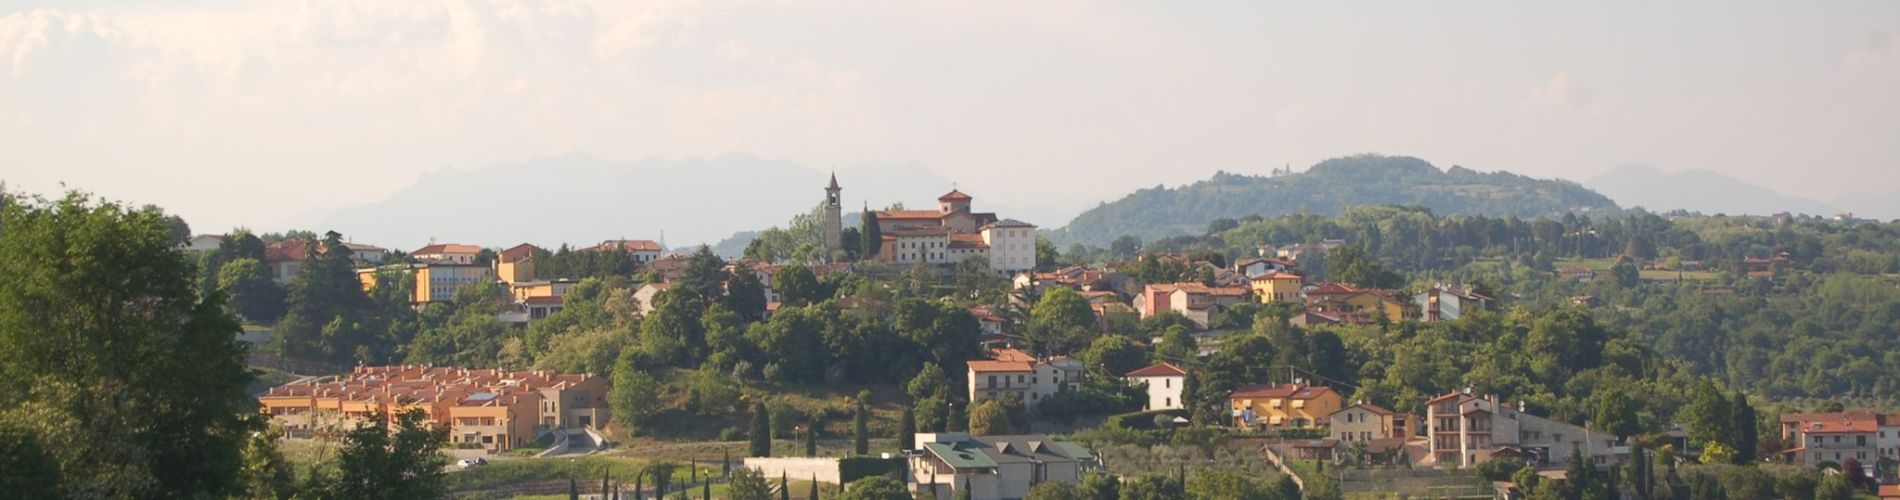 Monteviale Panorama